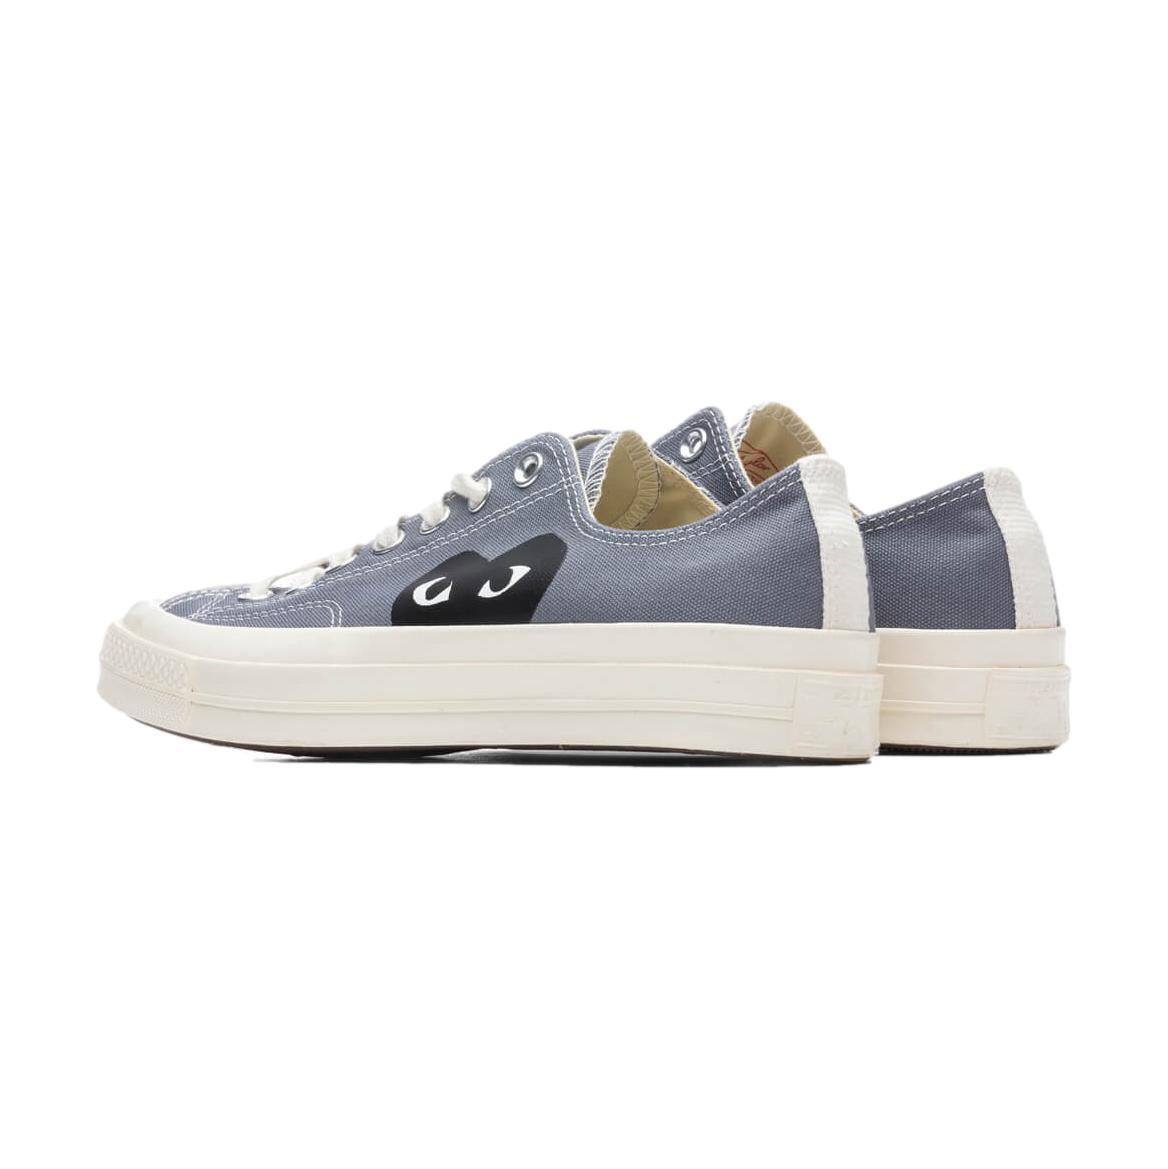 COMME DES GARCONS CONVERSE LOW TOP 1970 OX - Gravity NYC